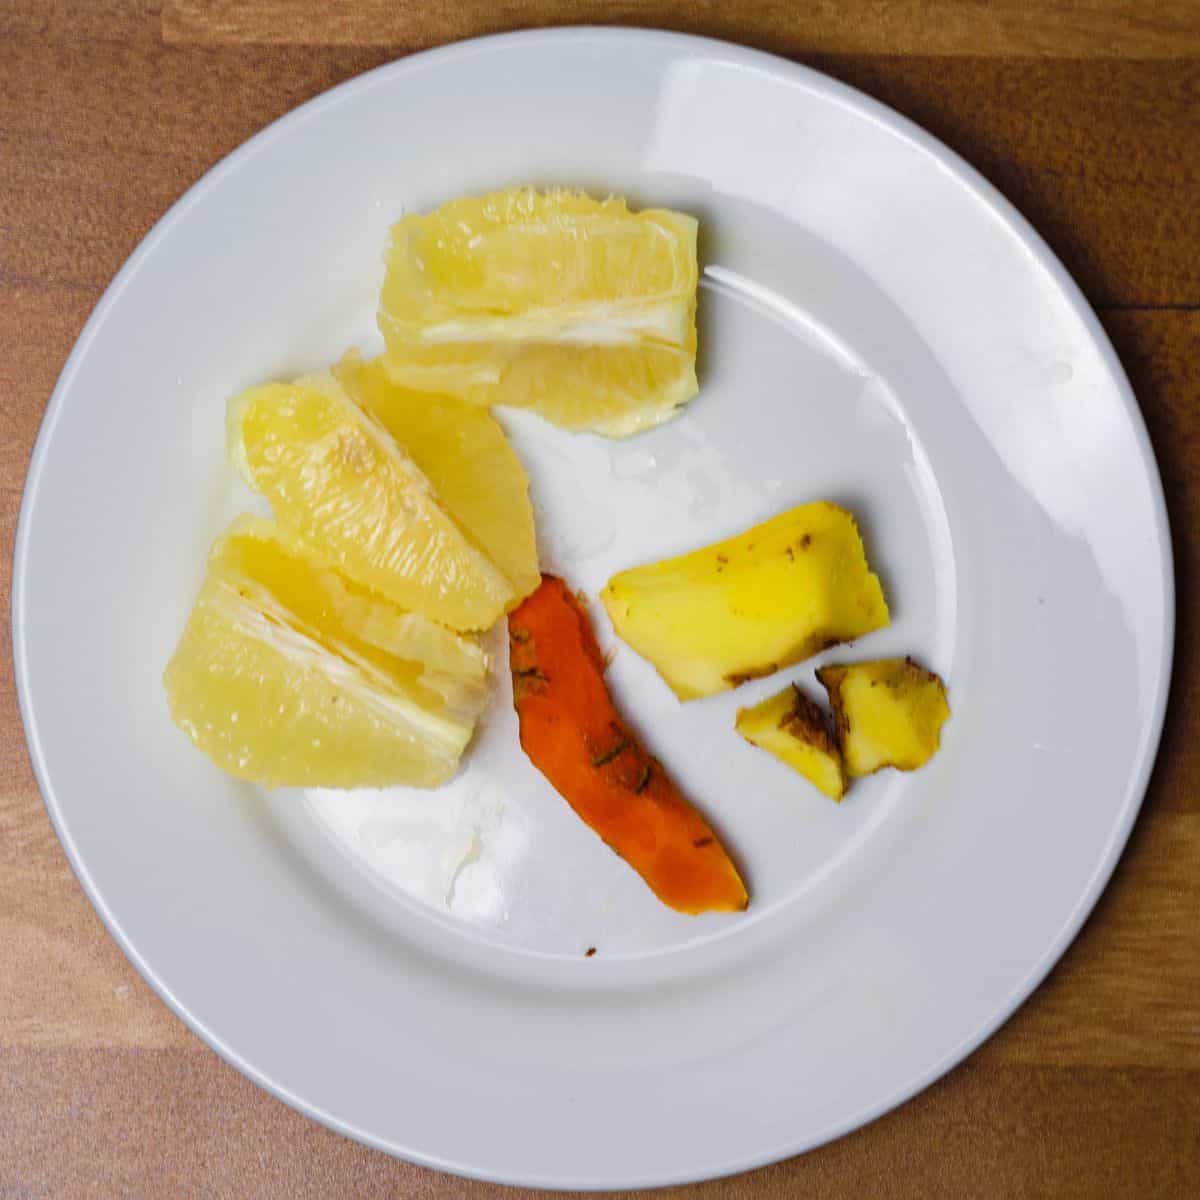 A white plate holding peeled and chopped turmeric, ginger, and sections of lemon and pineapple, prepared for juicing.